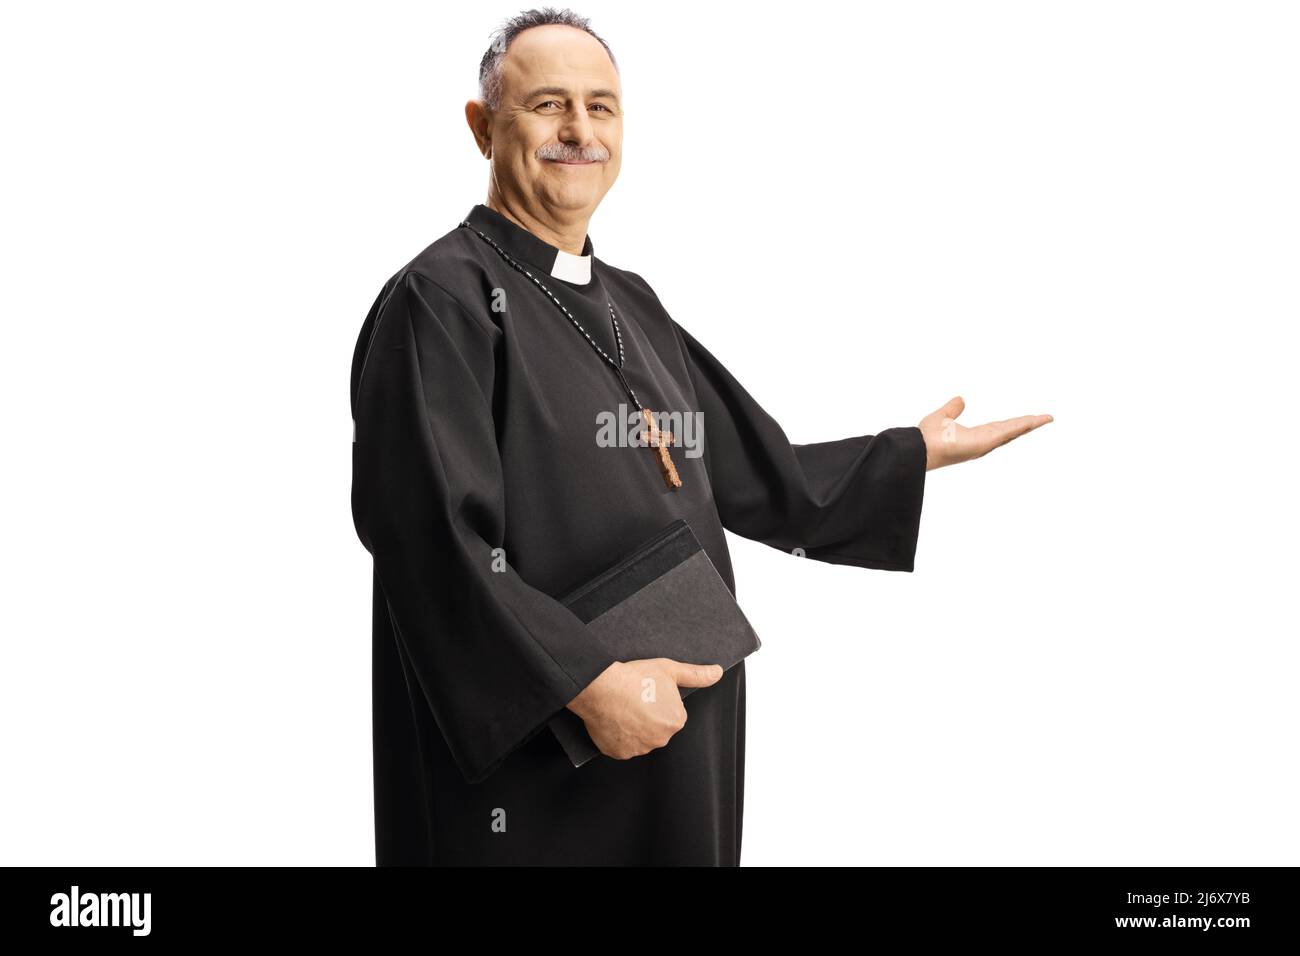 Mature priest gesturing welcome and holding a bible isolated on white background Stock Photo